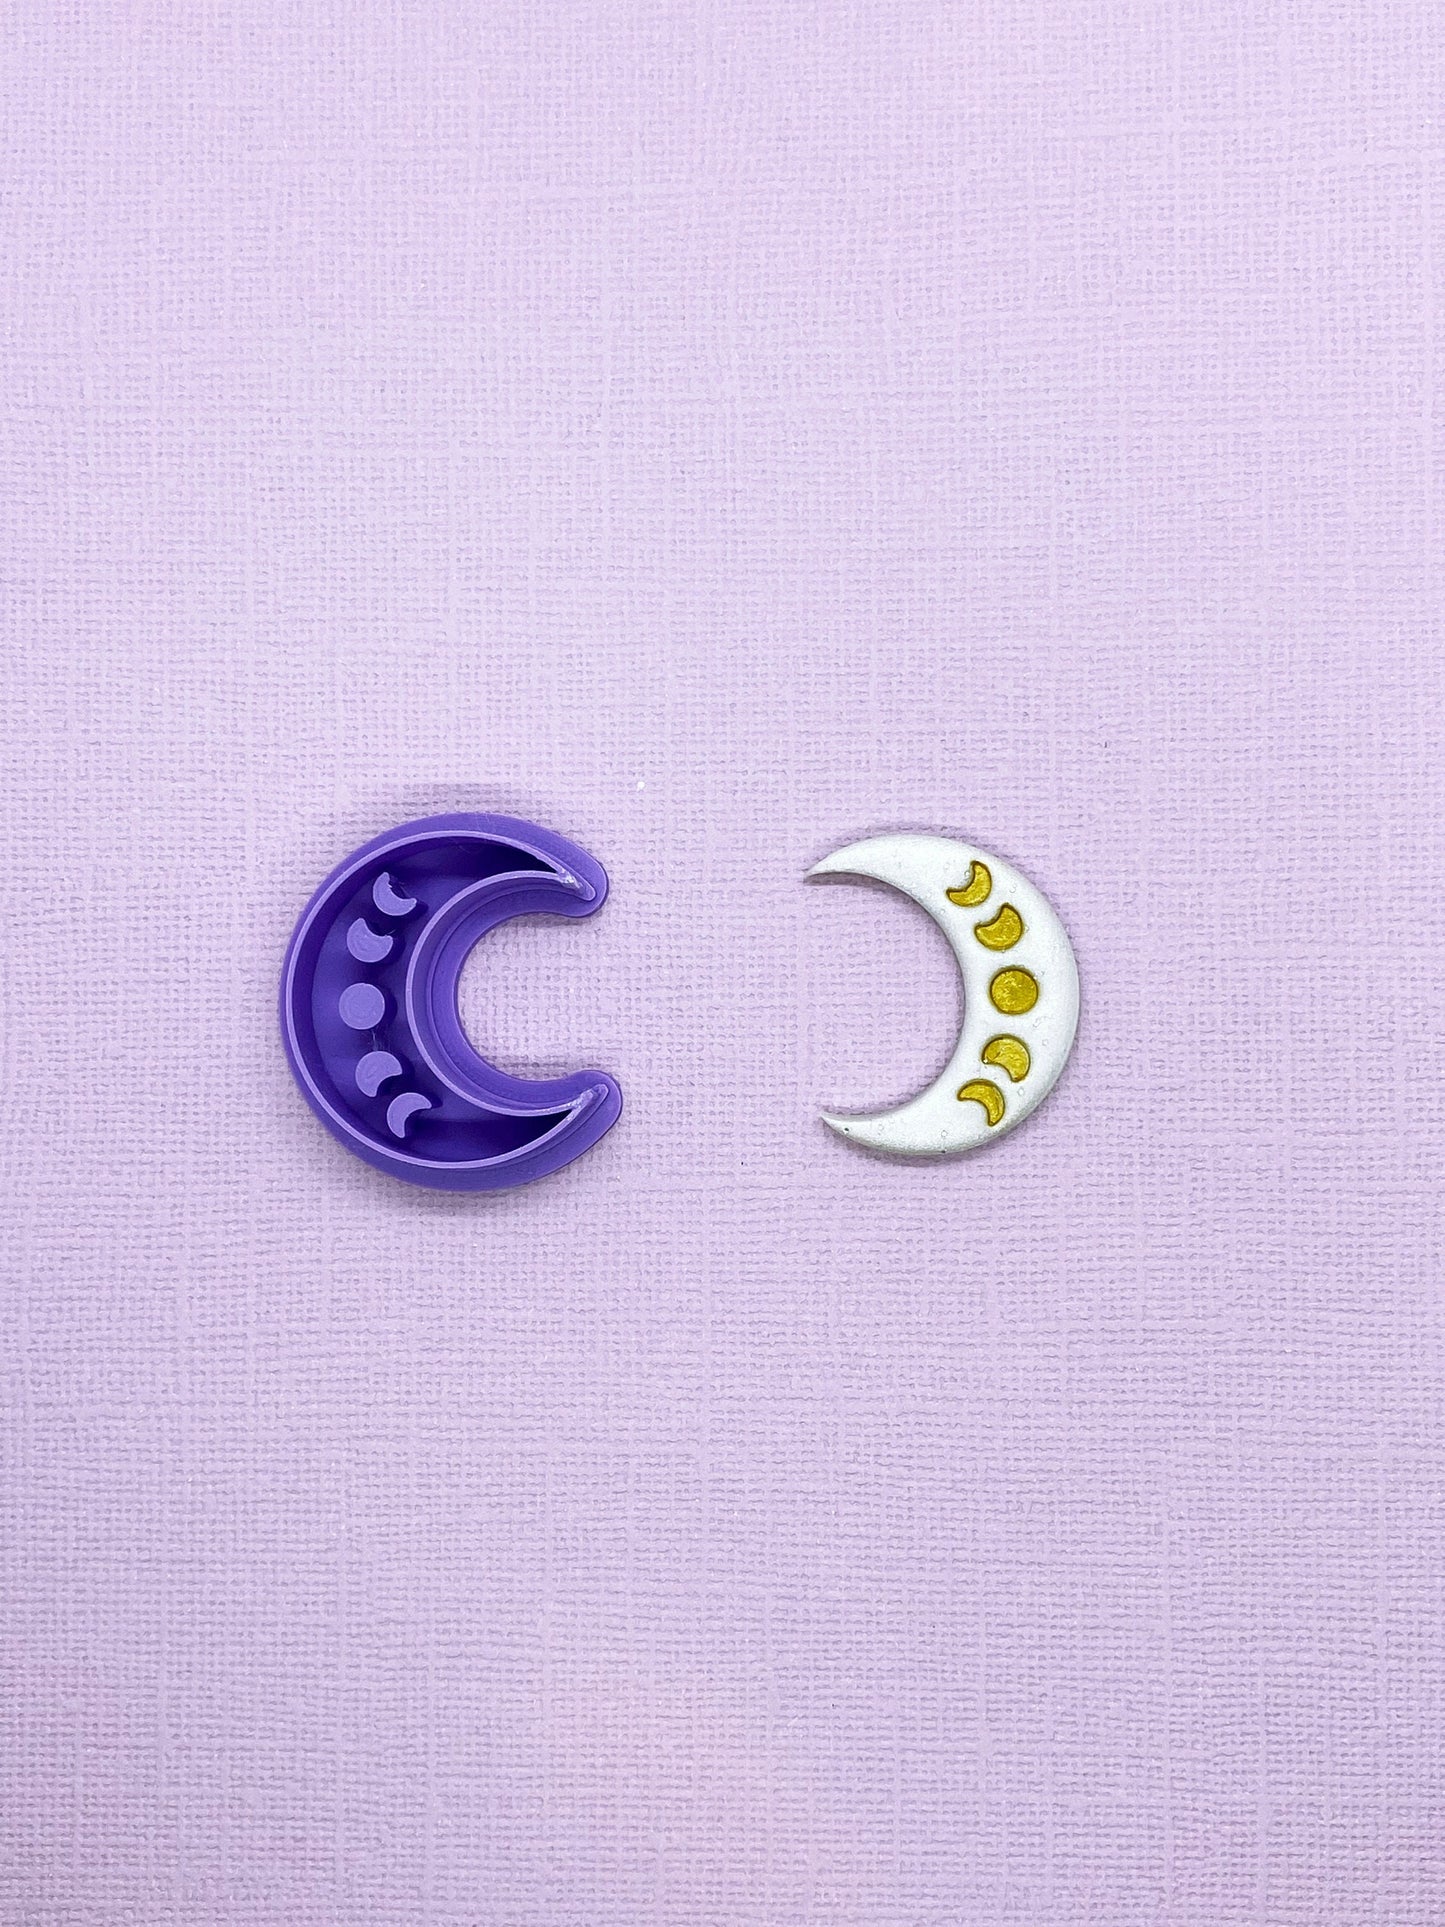 Crescent Moon Phase Clay Cutter